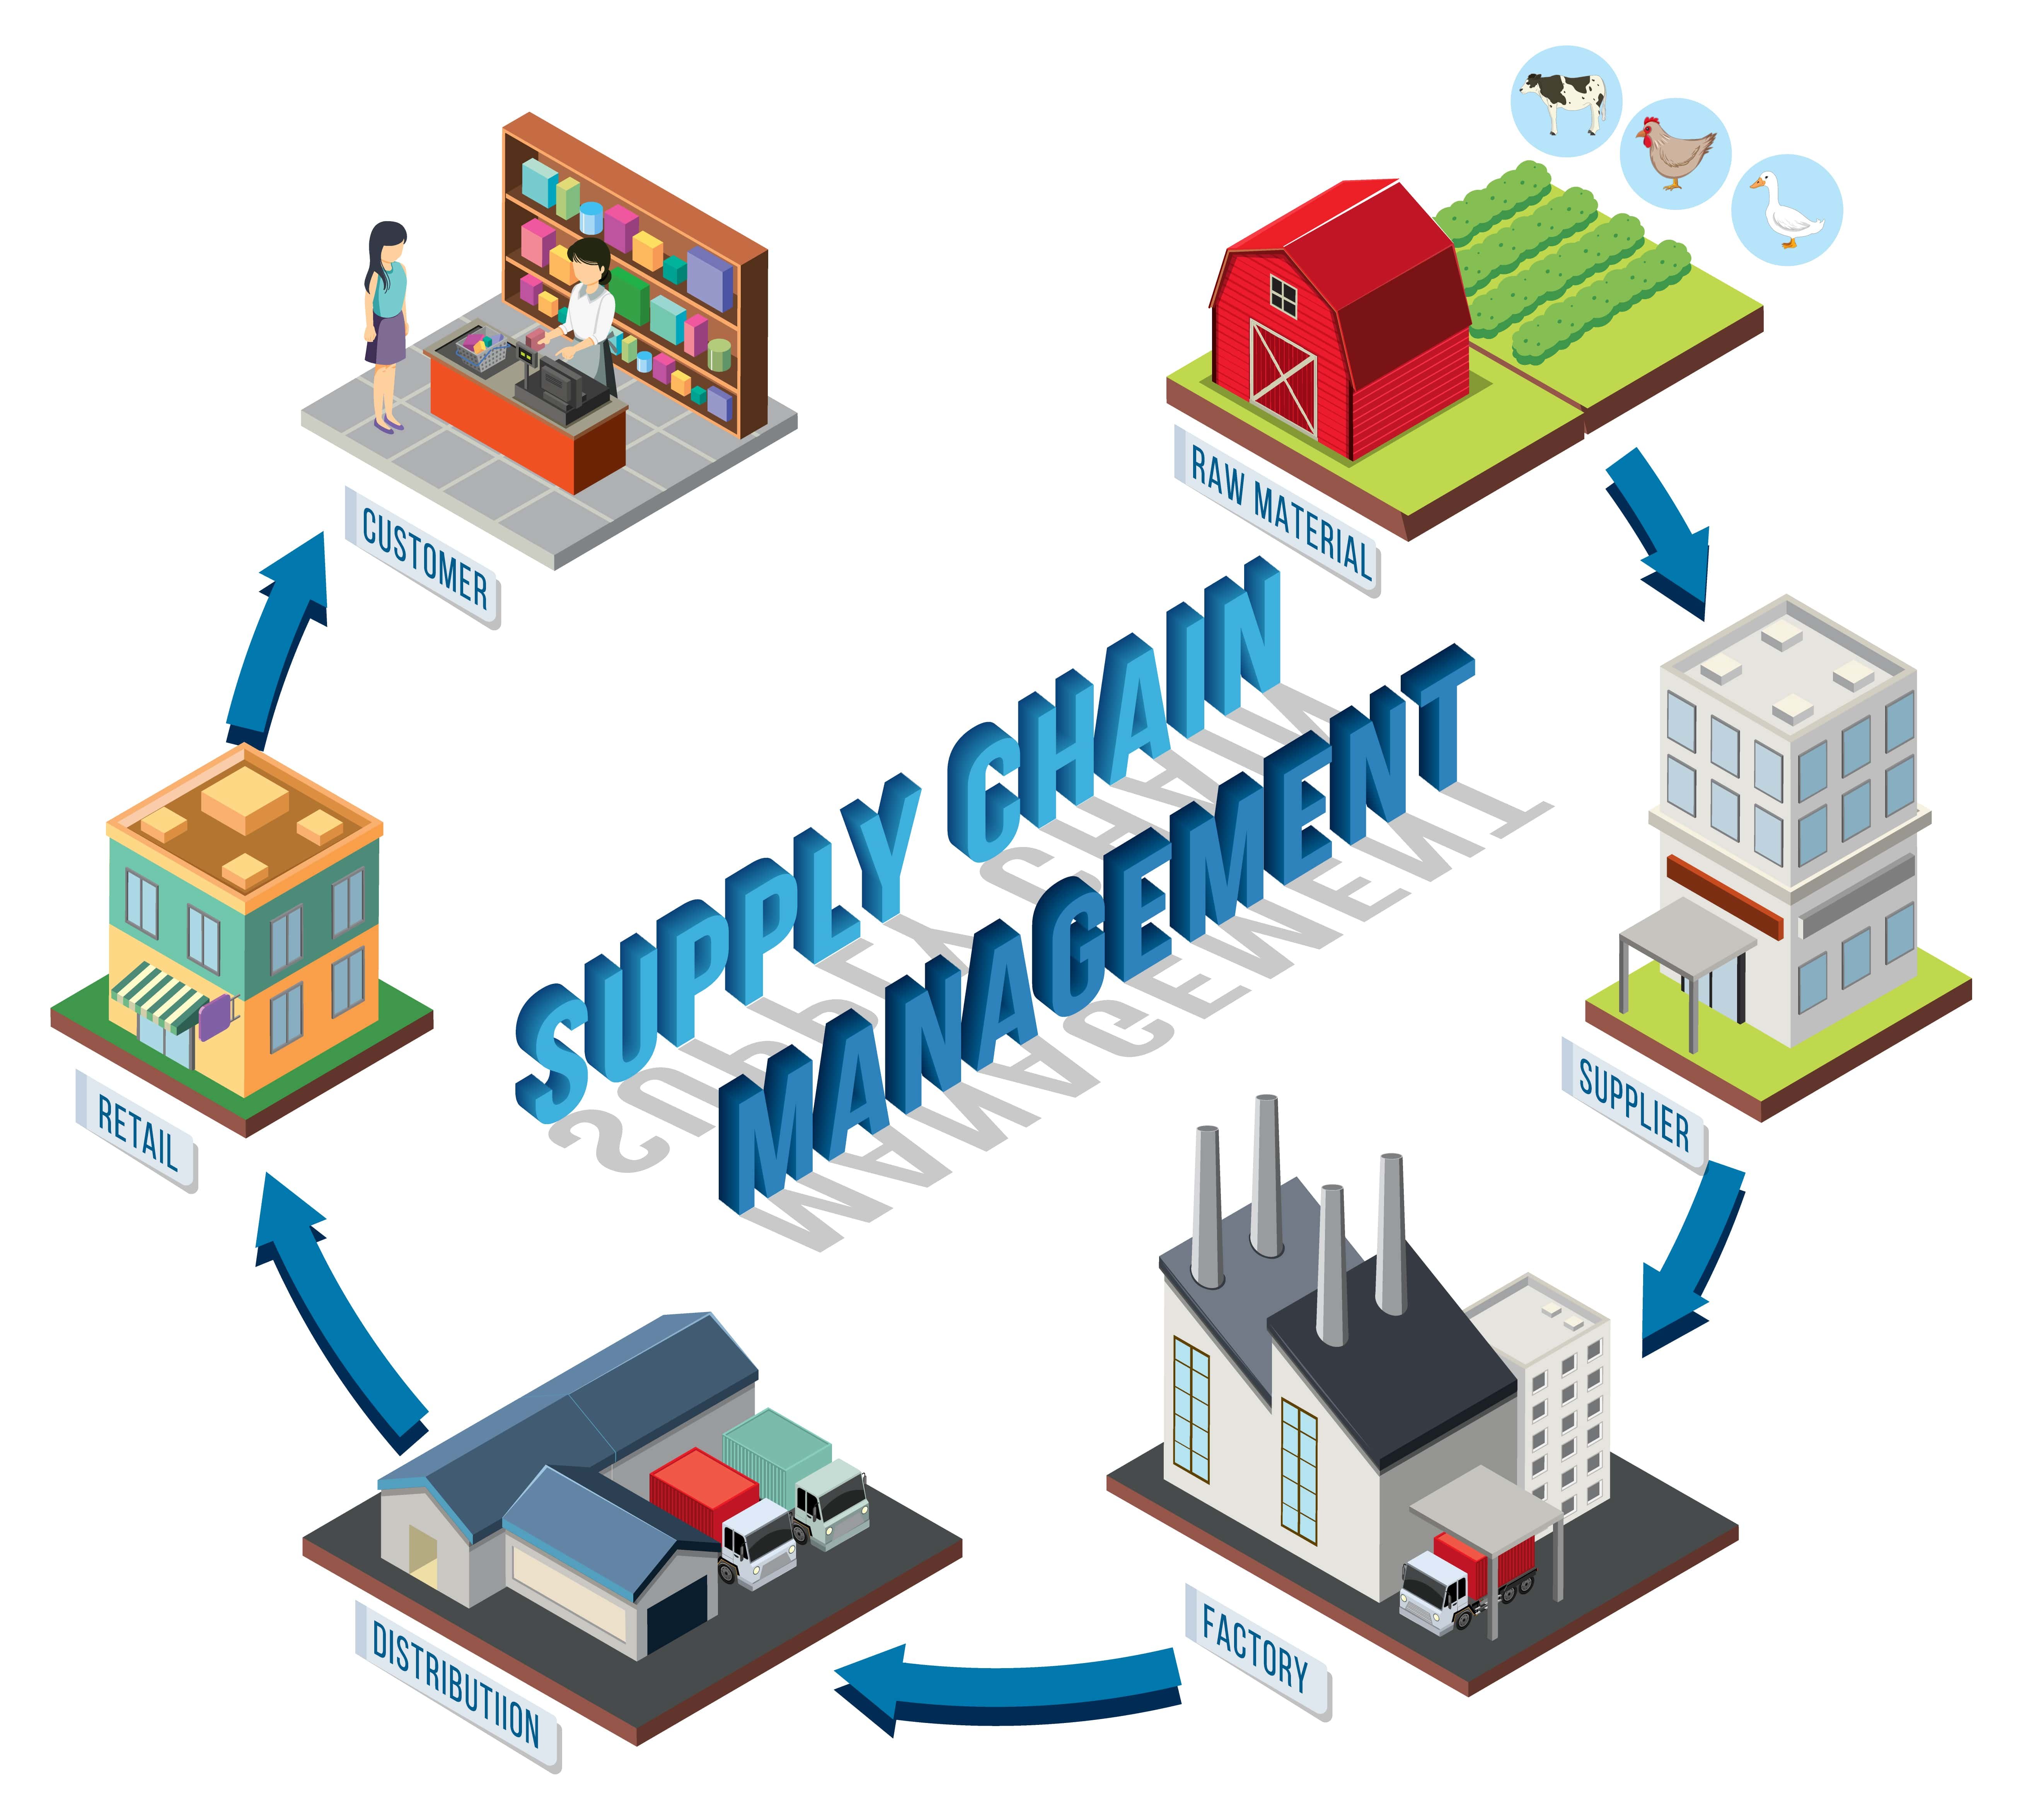 Supply Chain Management surrounded by six buildings each labelled Raw Material, Supplier, Factory, Distribution, Retail and Customer who all need an effective supply chain management process.